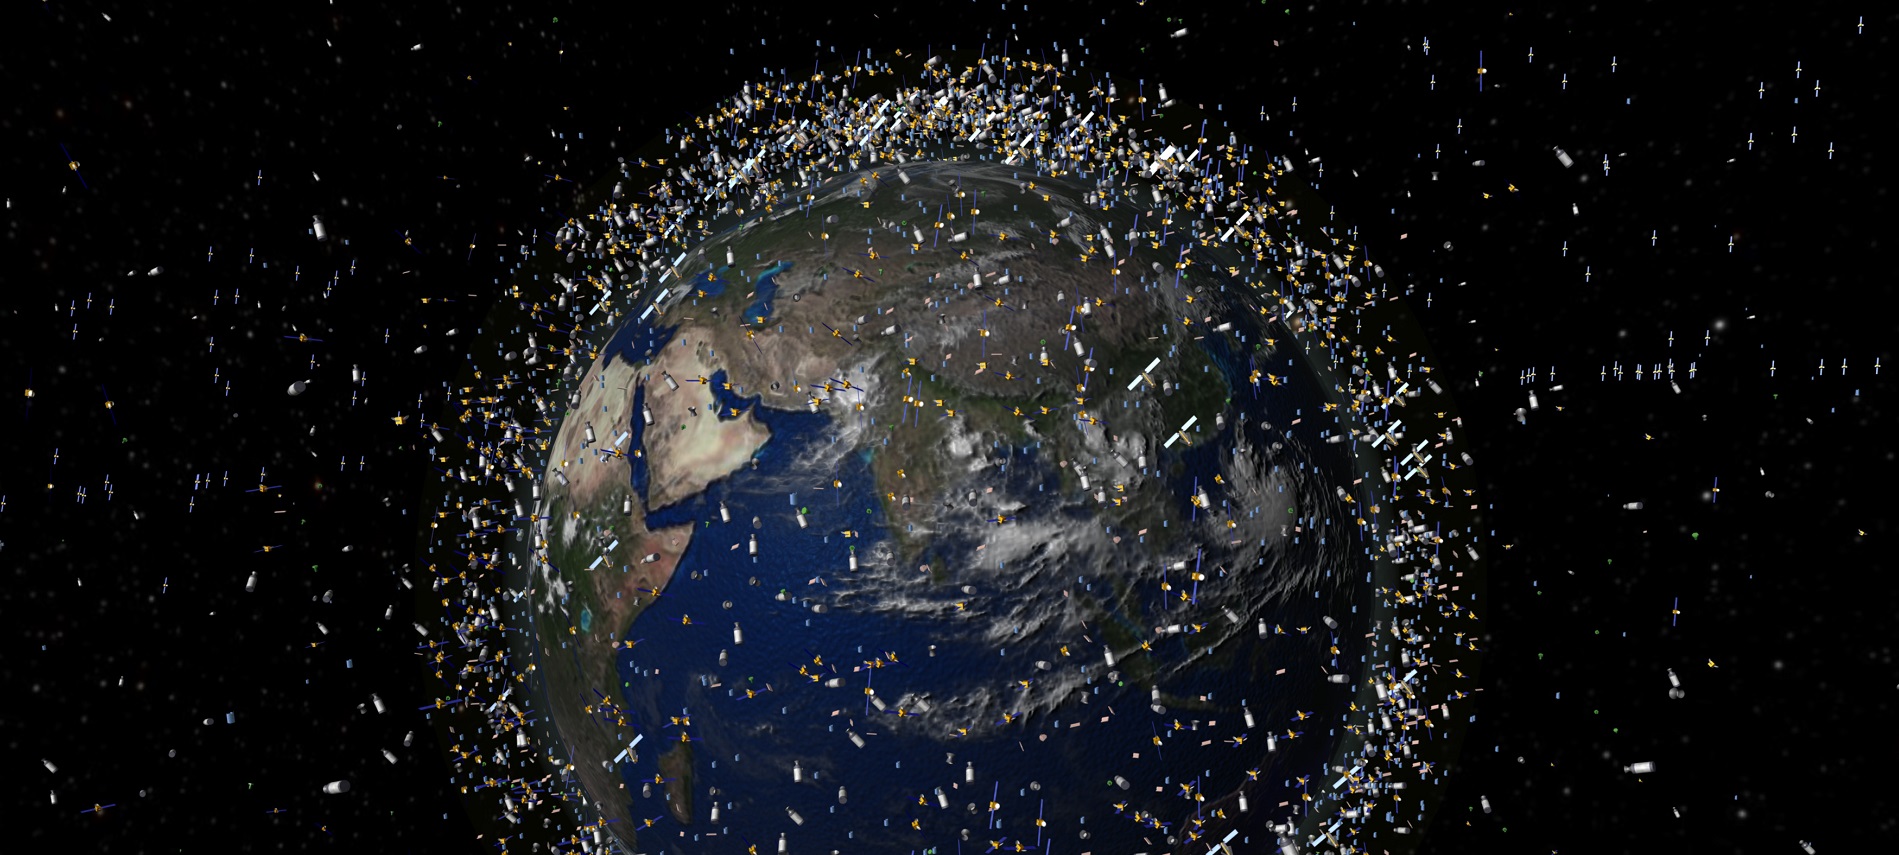 Artistic depiction of space debris orbiting the earth. The size of the debris is exaggerated in comparison to the earth.